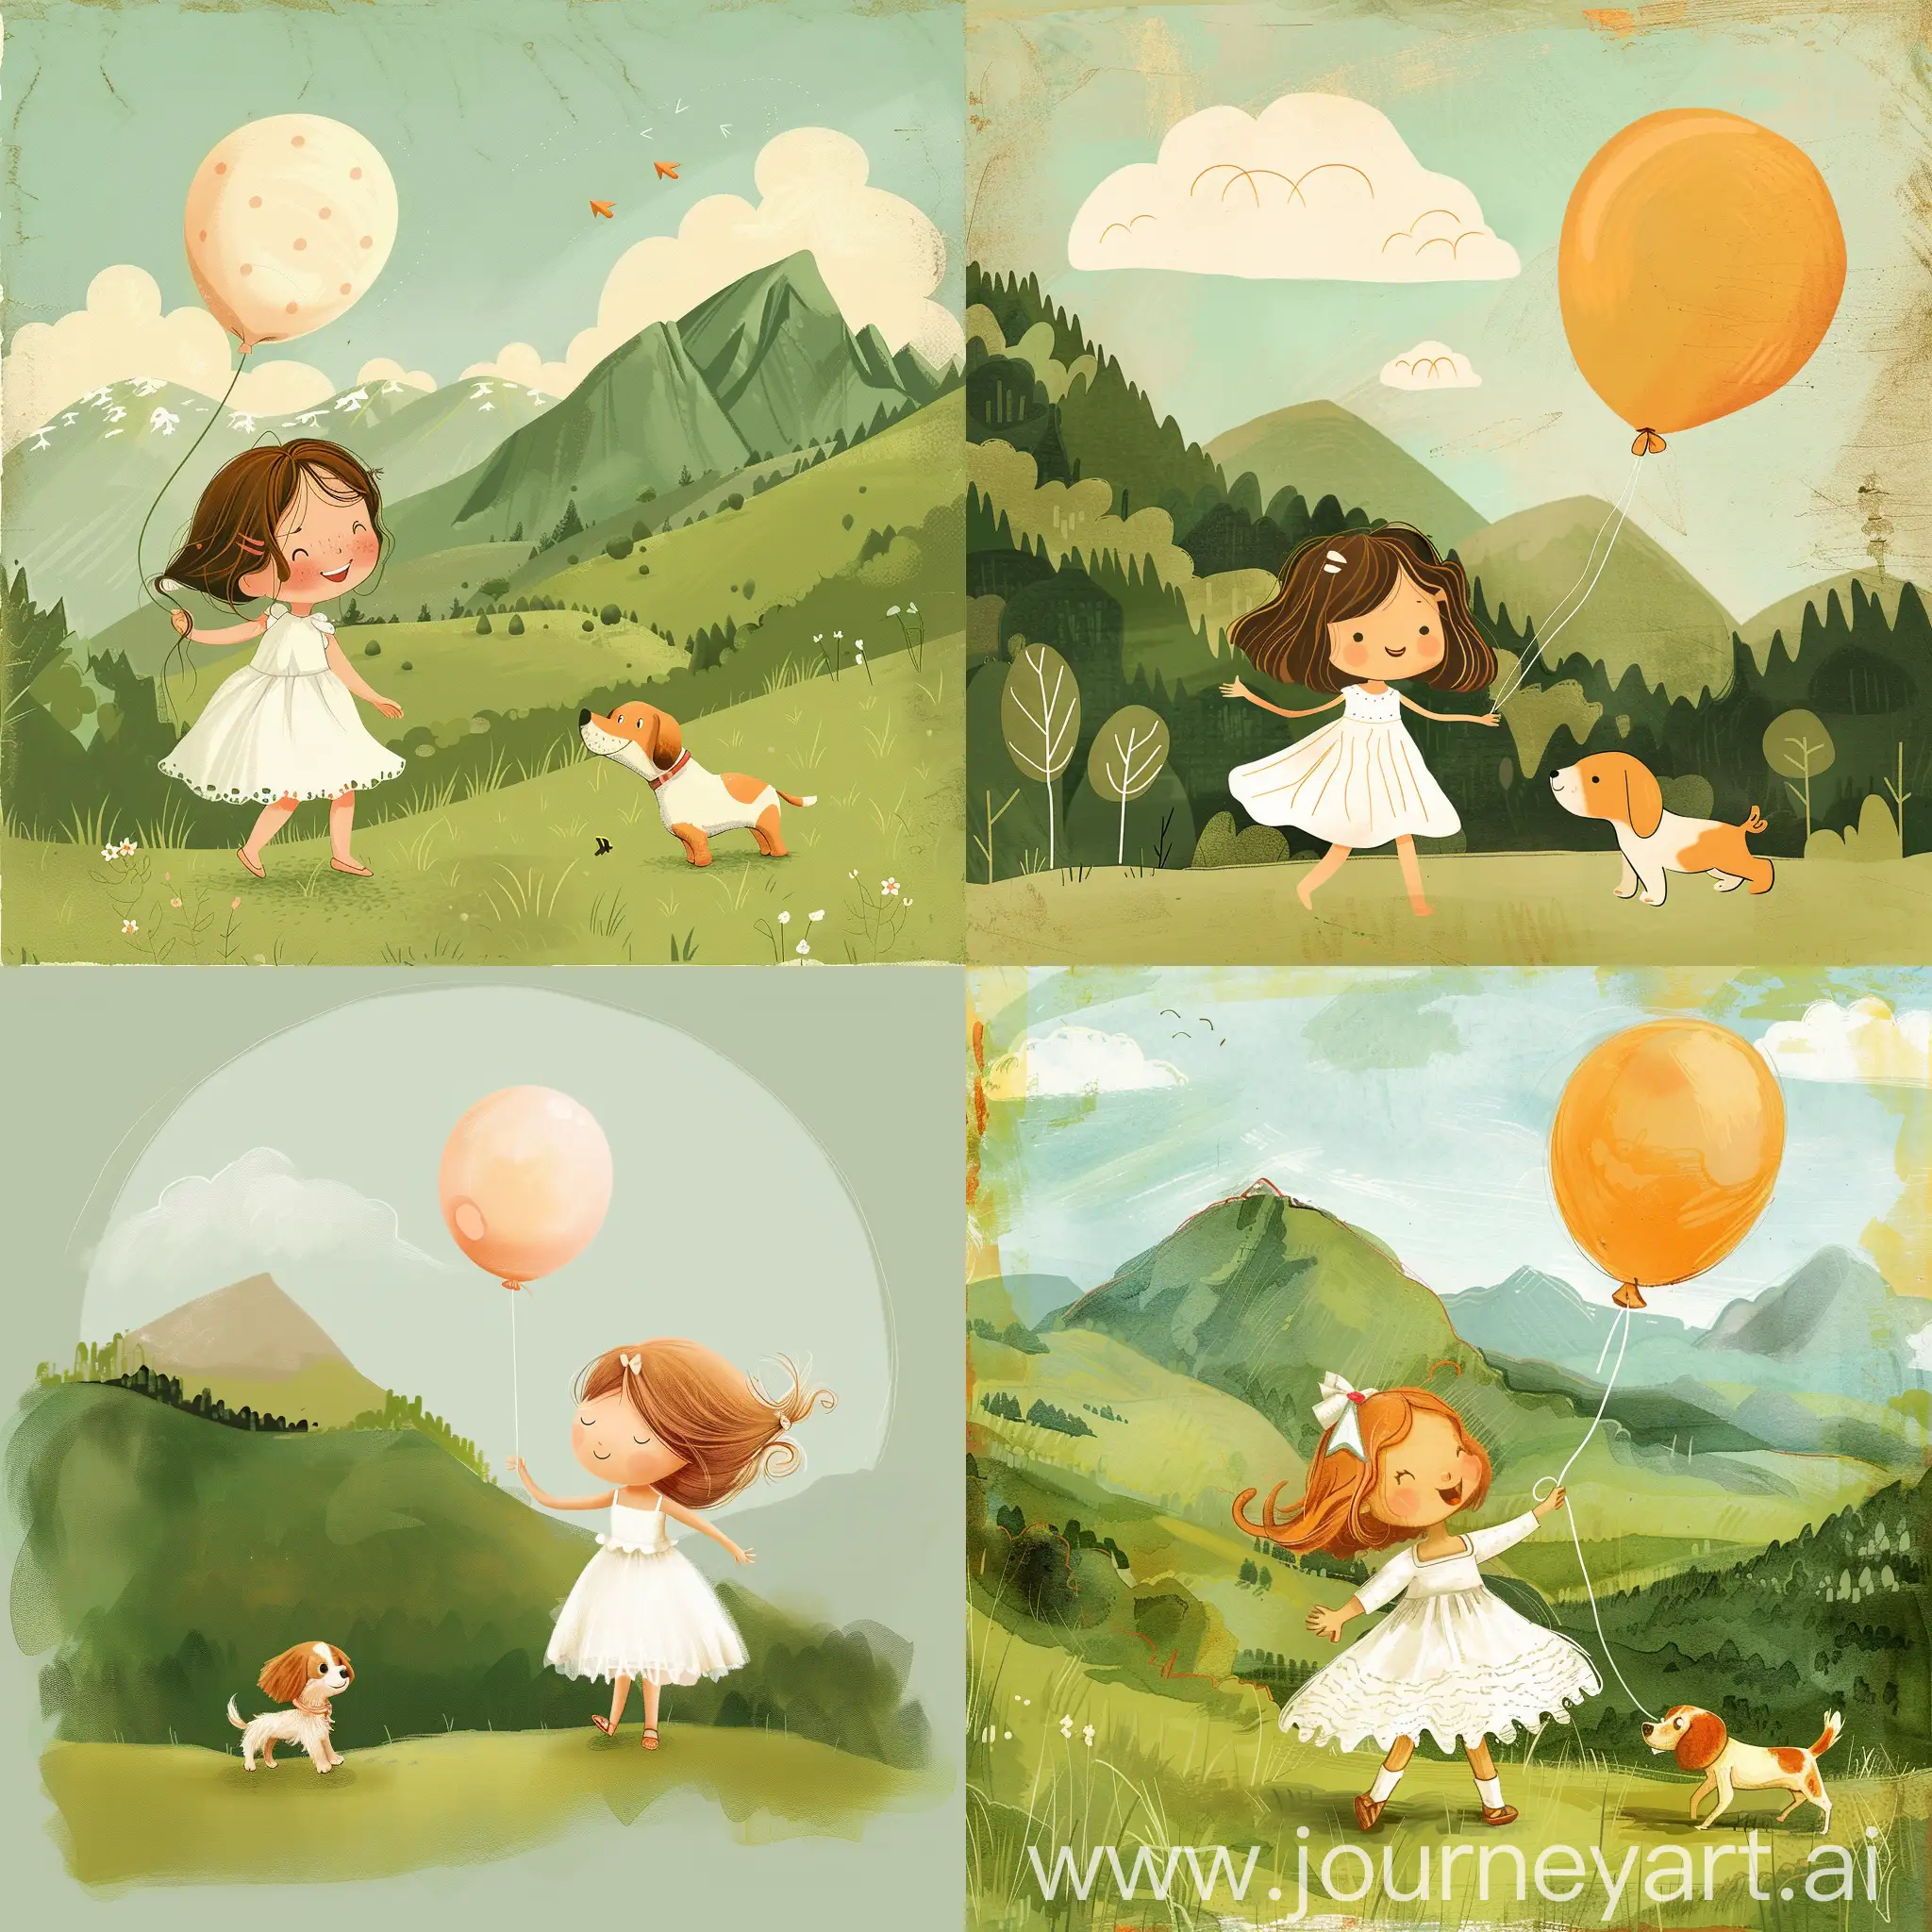 Joyful-Girl-in-White-Dress-with-Balloon-and-Dog-on-Green-Mountain